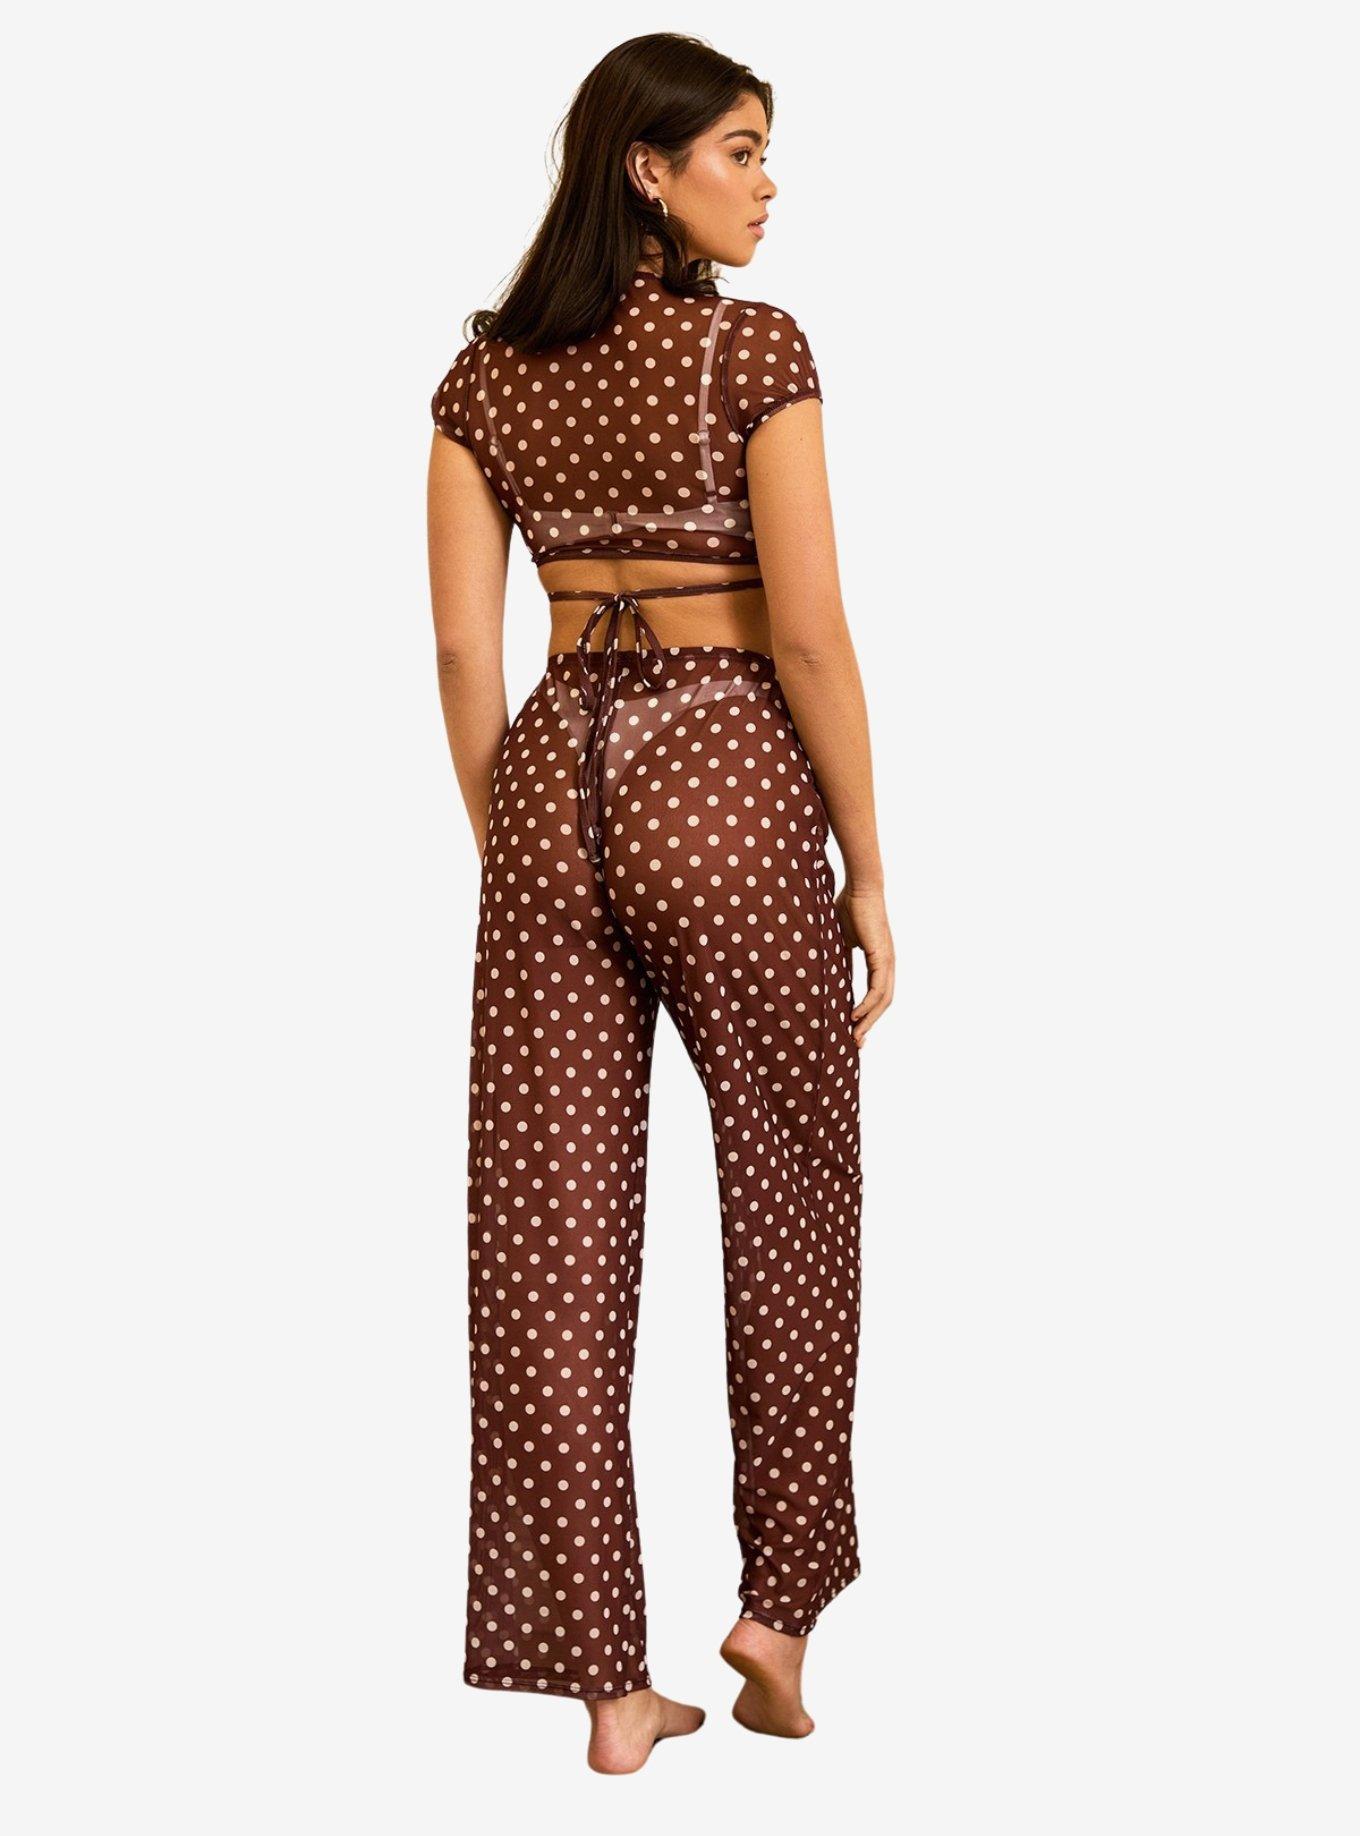 Dippin' Daisy's That Girl Swim Cover-Up Pants Dotted Brown, BROWN, alternate